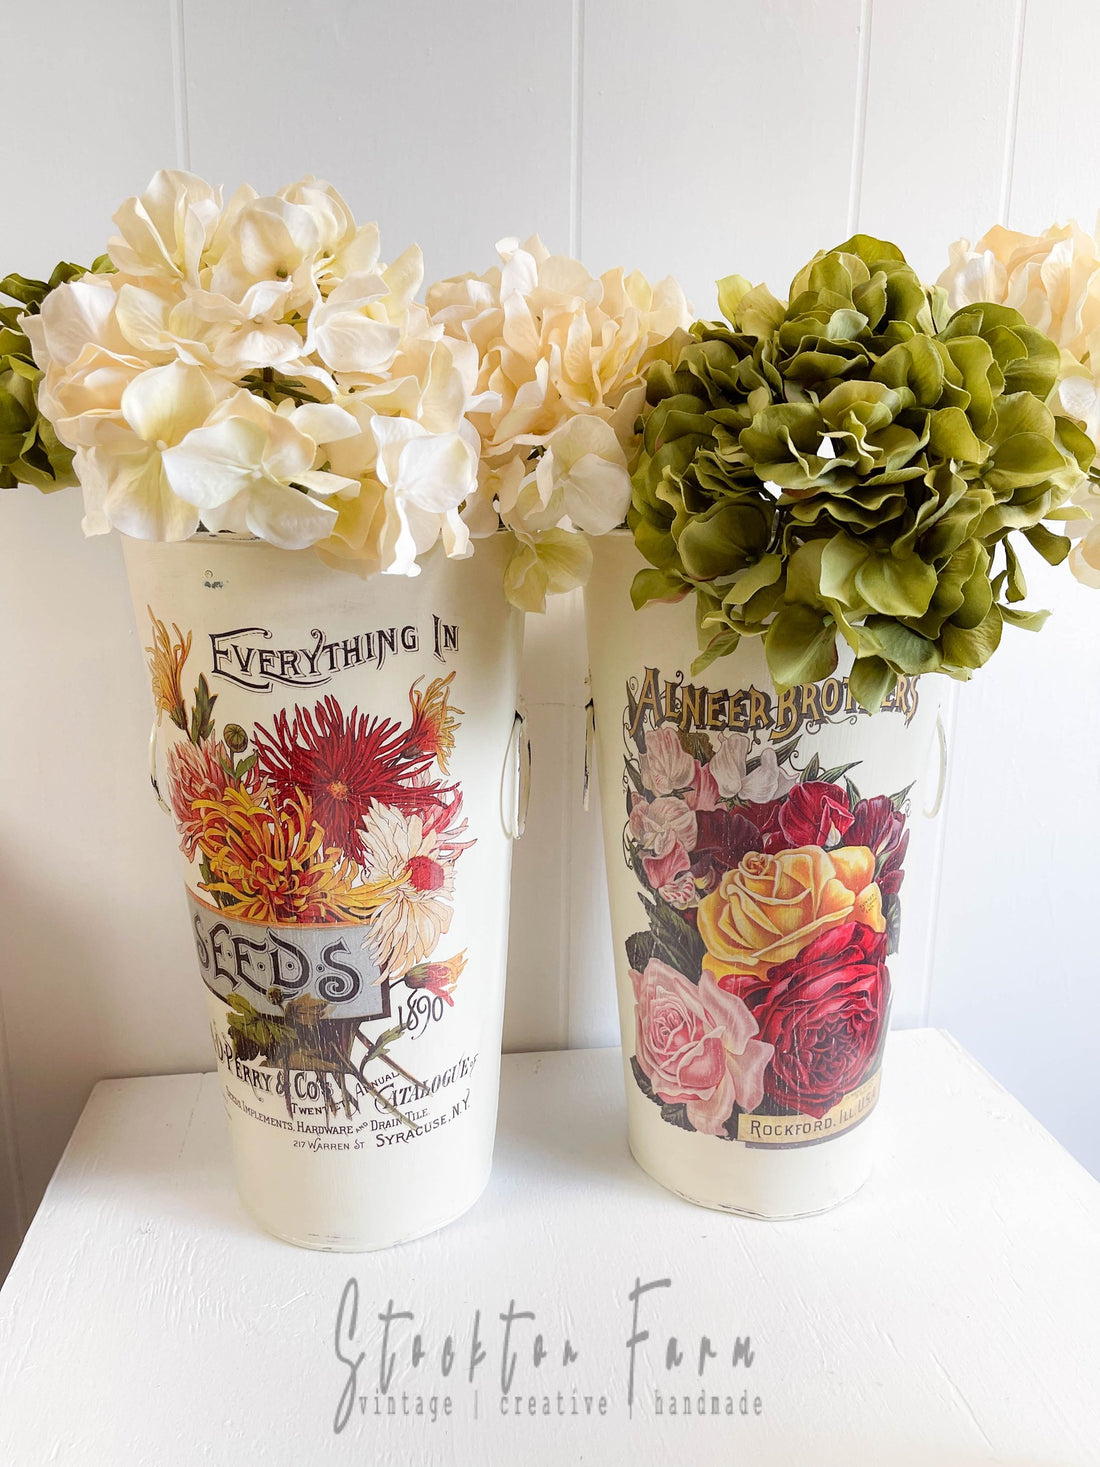 An image of flower vases